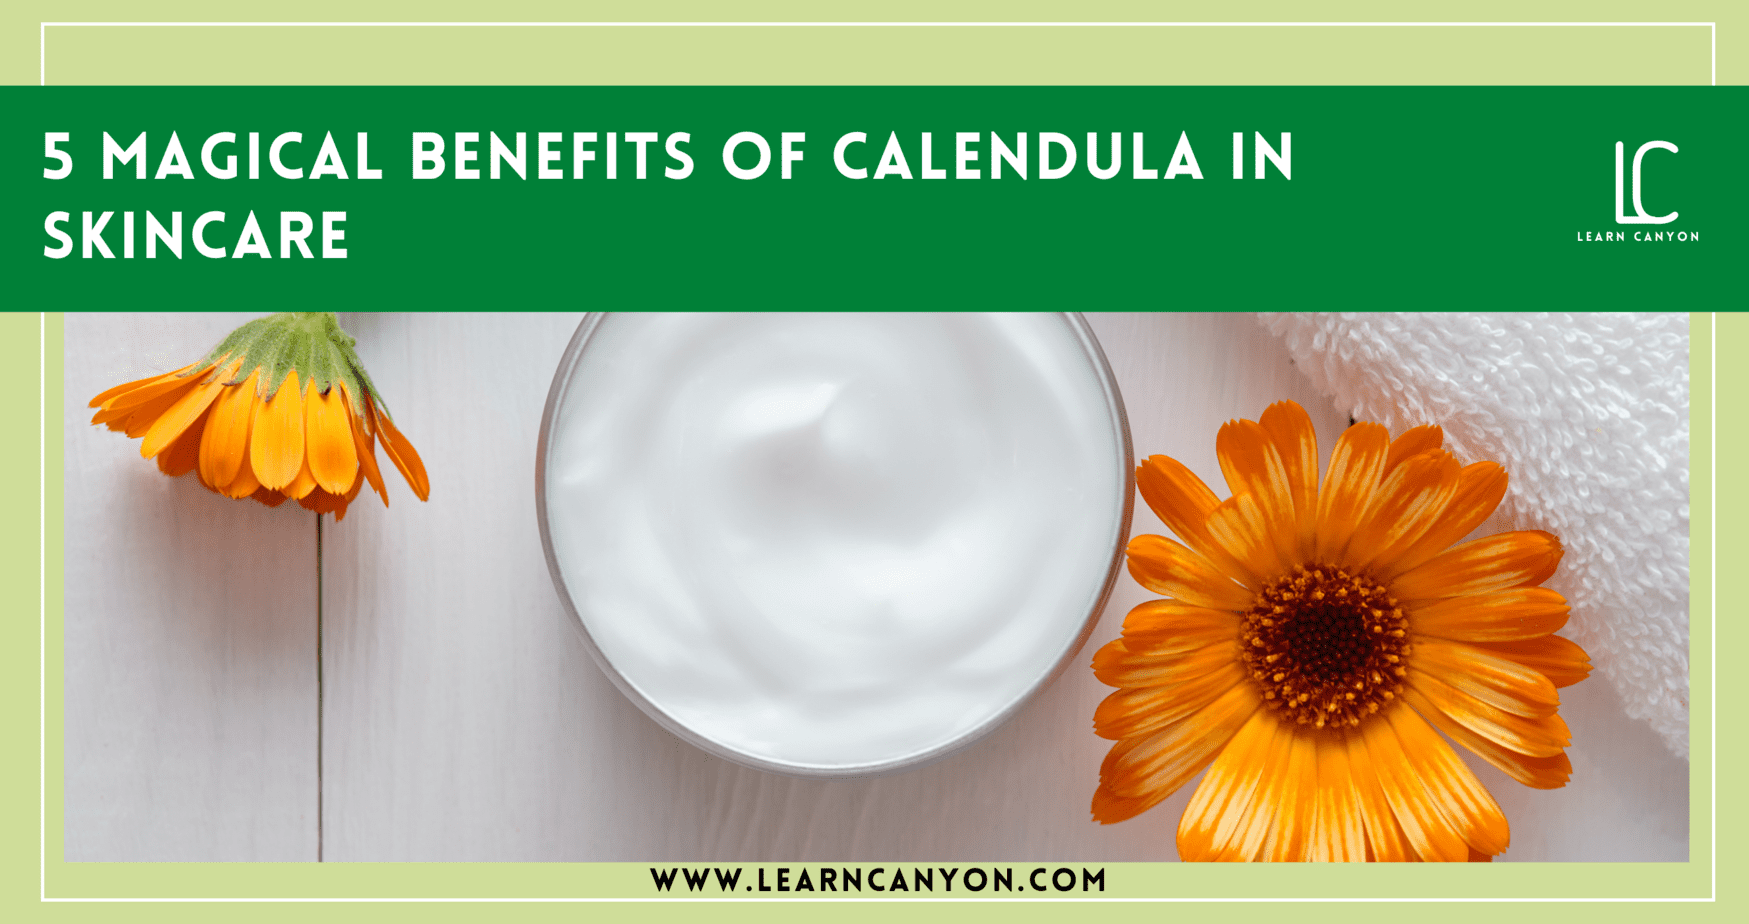 Calendula Flower: Facts, Benefits, Grow and Care, Uses